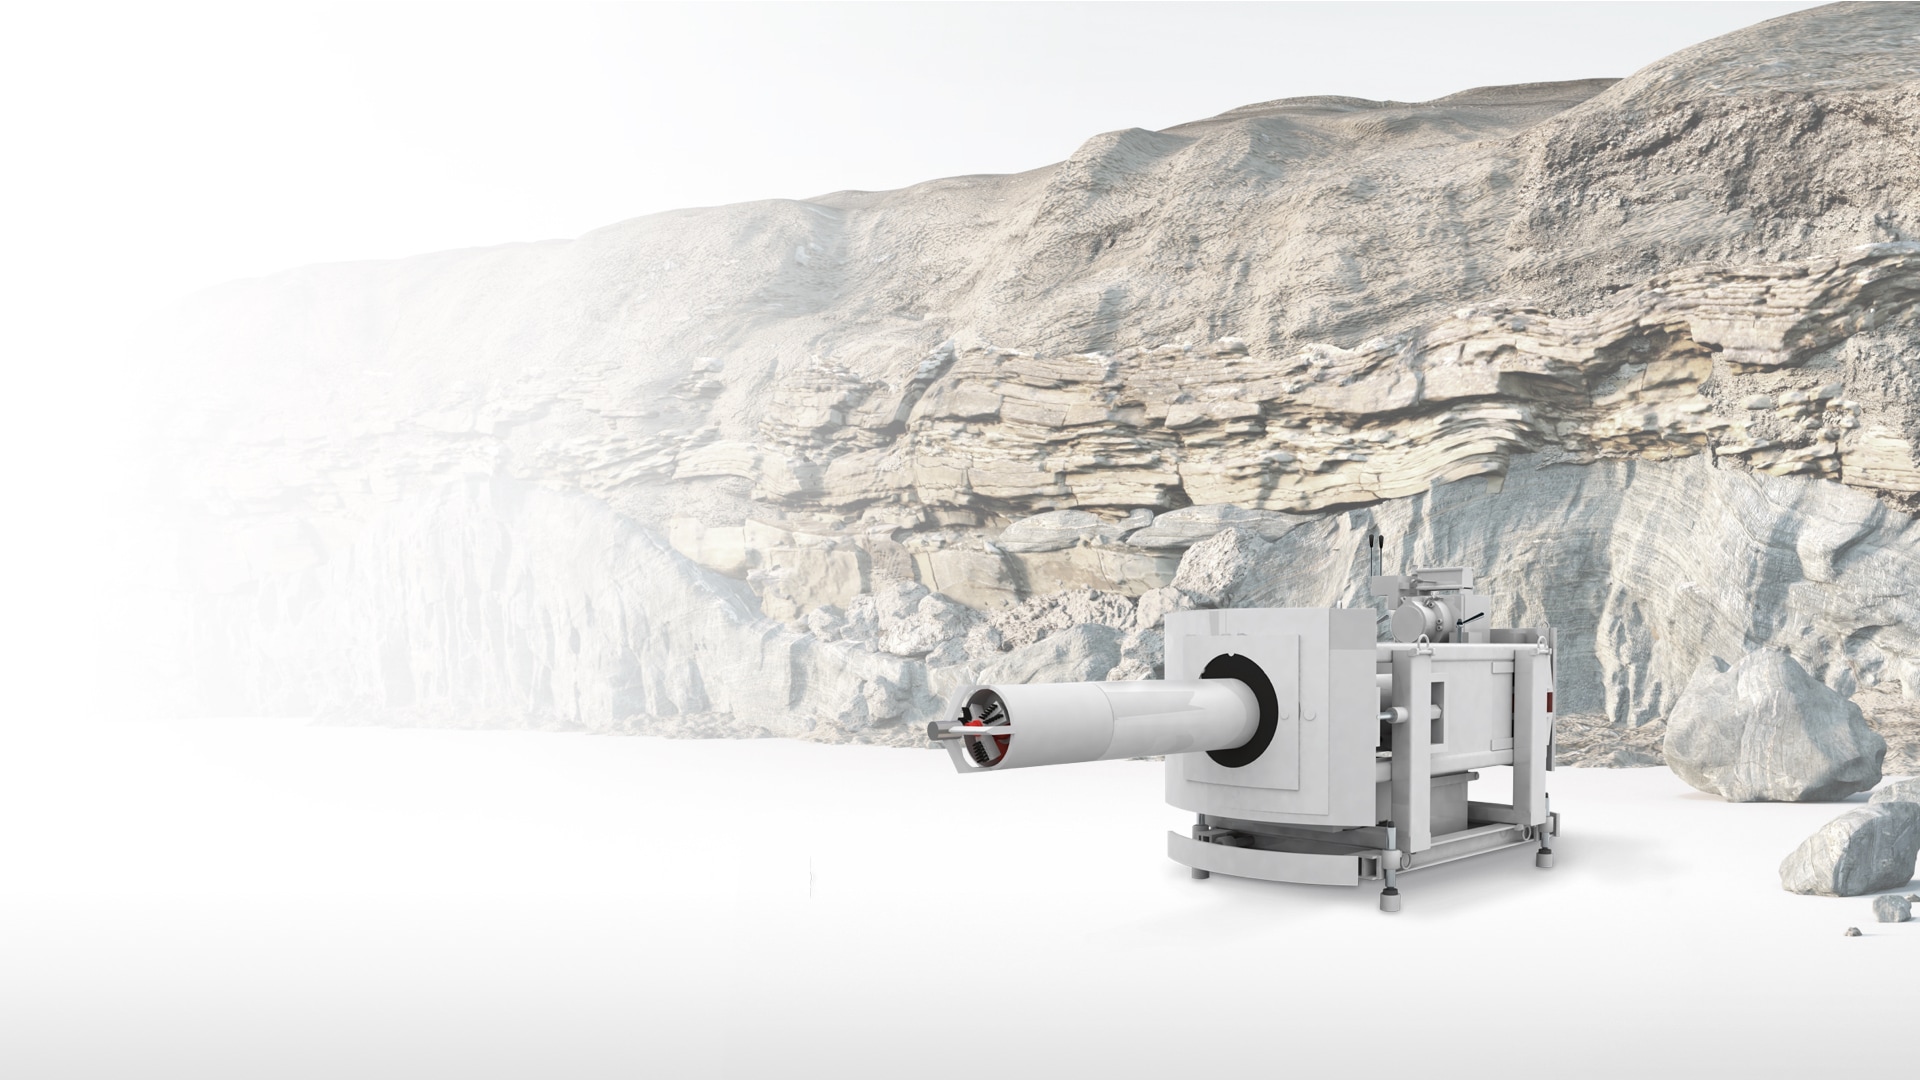 Illustration of an auger drilling machine with a stone wall in the background.